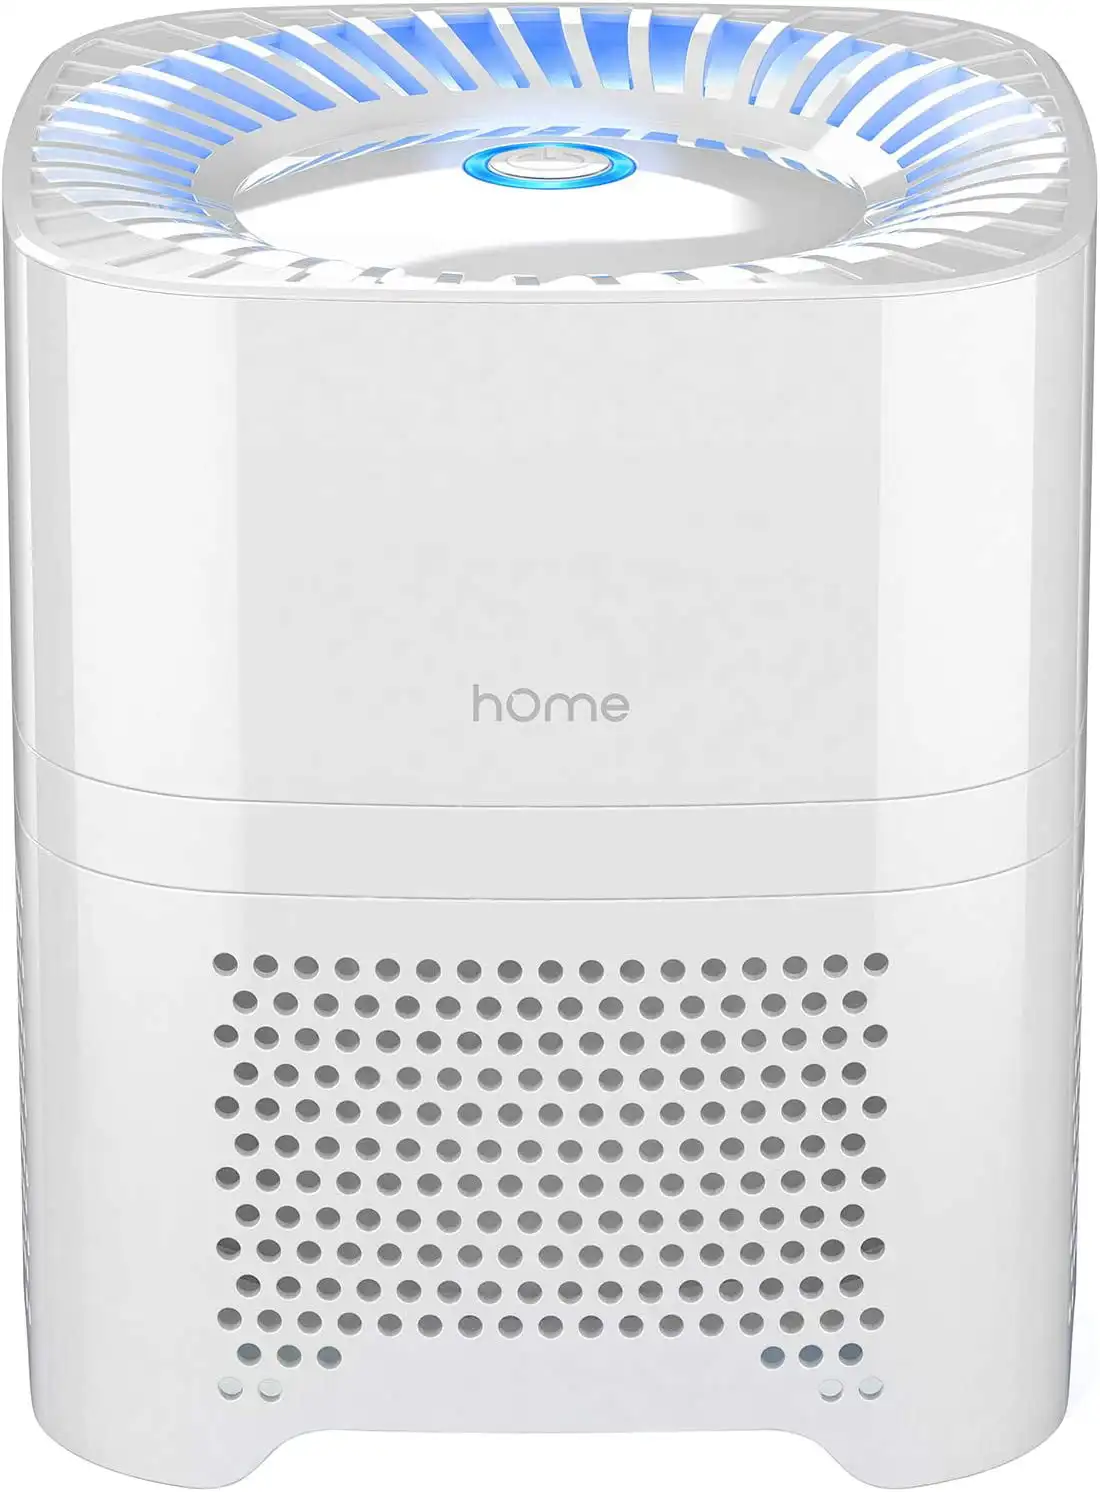 

4-in-1 Compact Air Purifier - Quietly Ionizes and Purifies Air to Reduce Odors and Particles from the Air